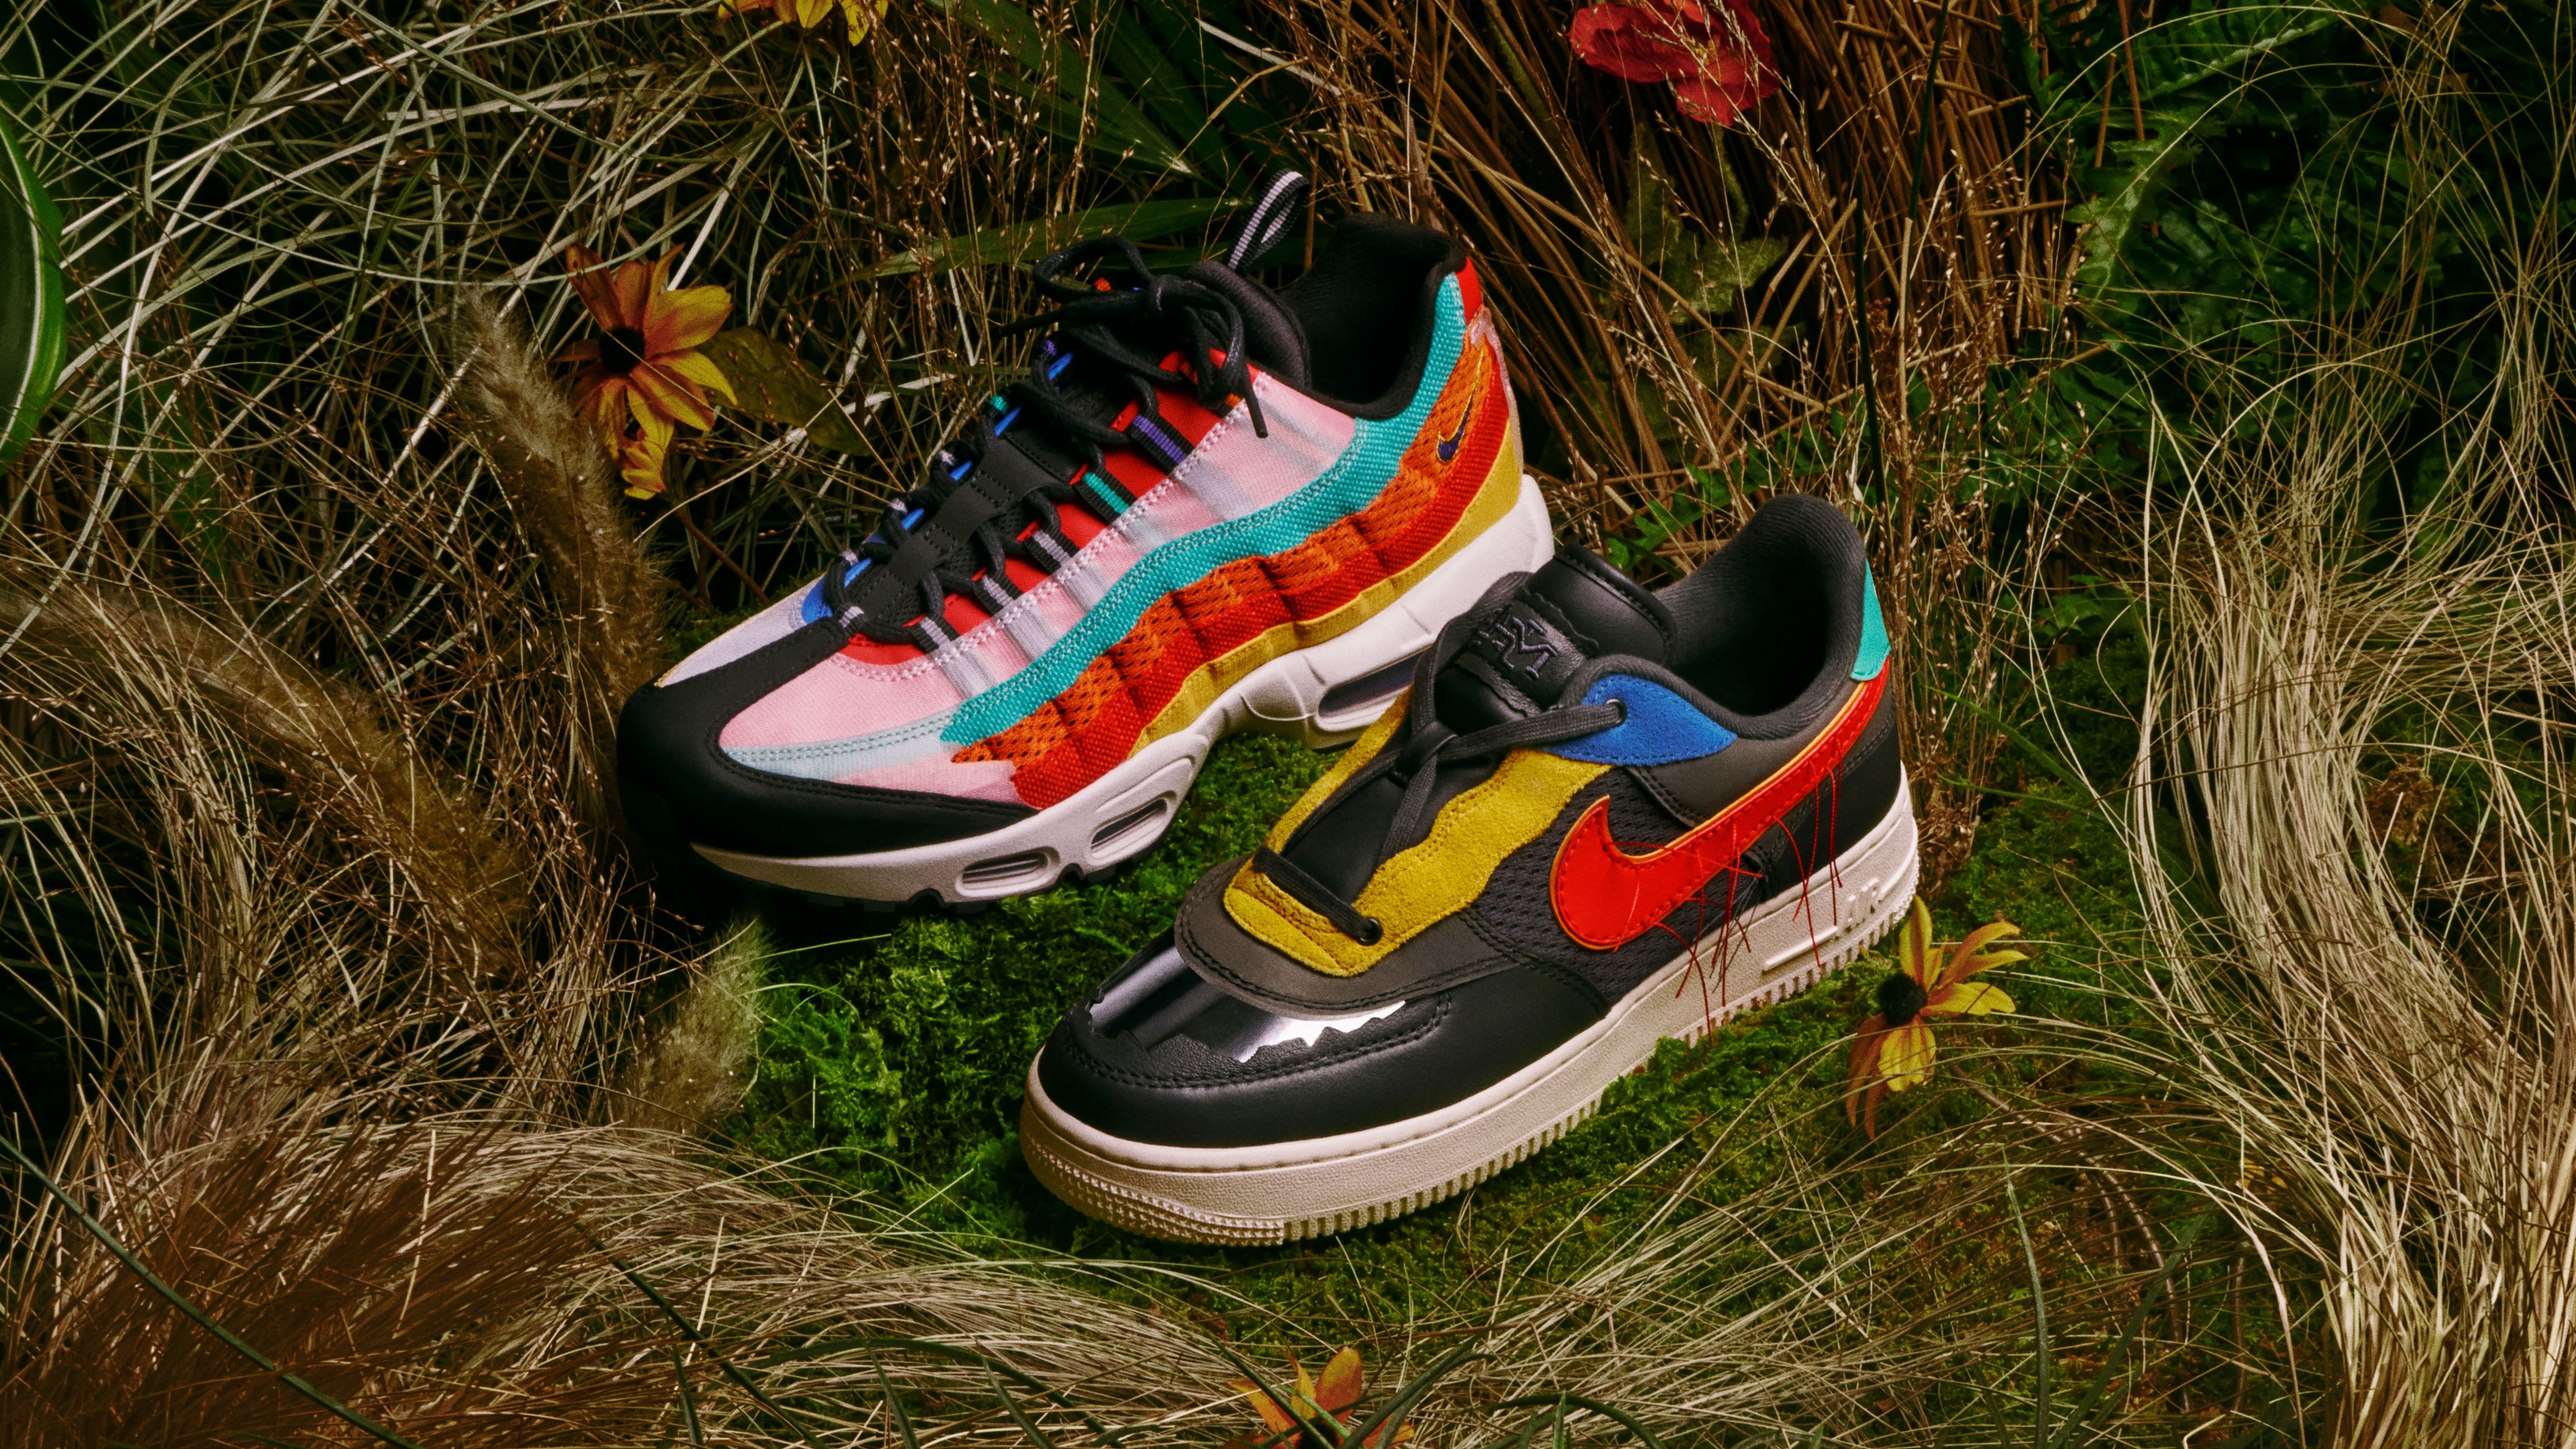 Nike Converse 2020 Black History Month Collection | Sole Collector